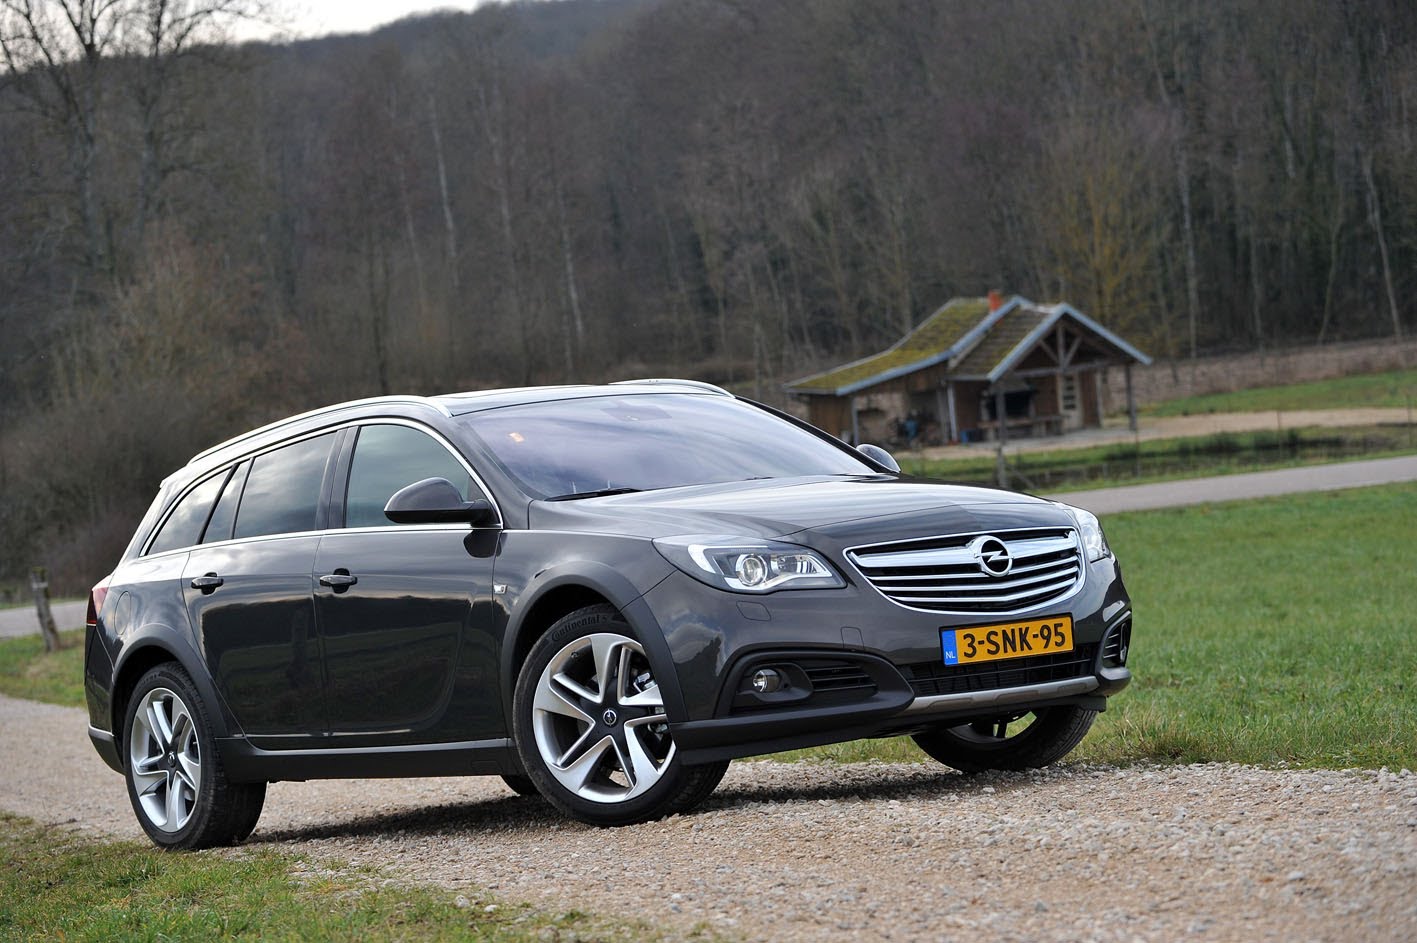 HQ 2014 Opel Insignia Country Tourer Wallpapers | File 212.18Kb